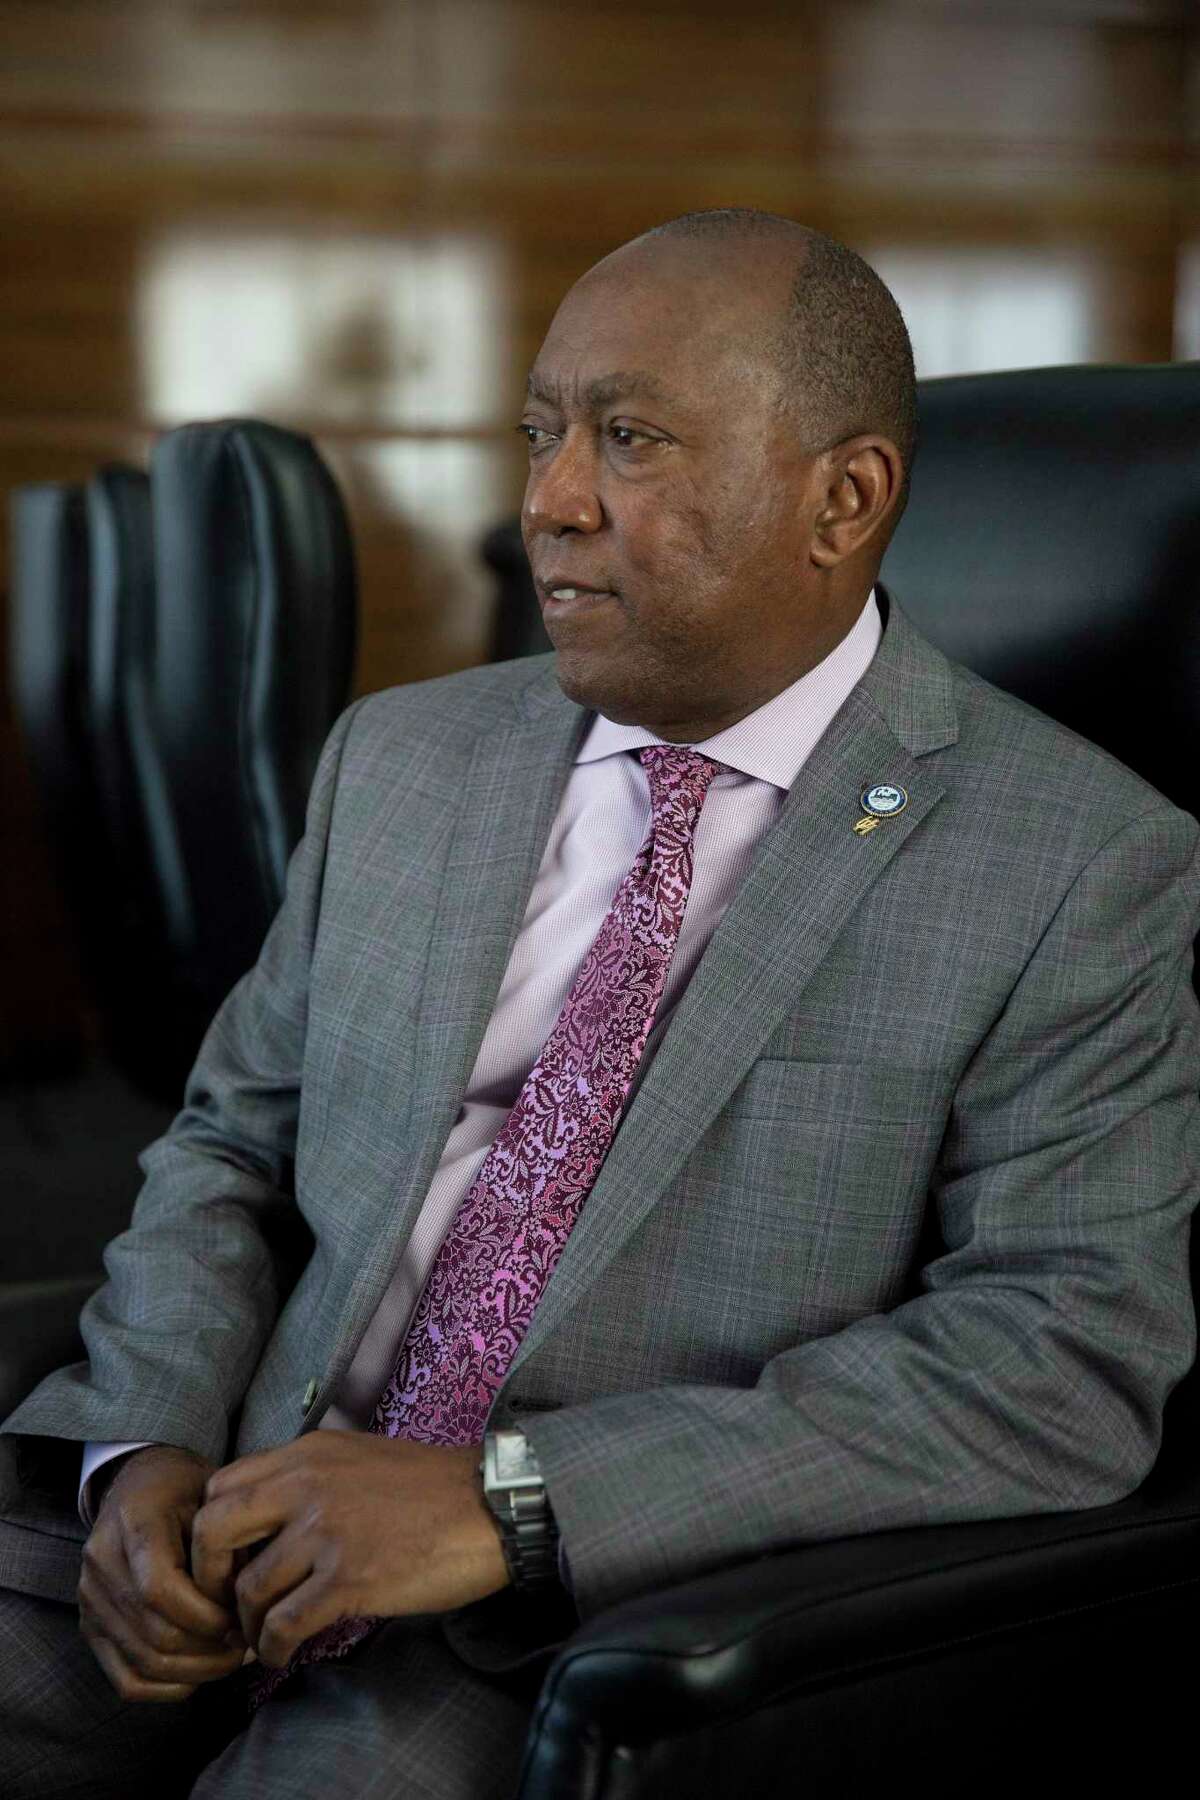 Mayor Sylvester Turner has proposed a one-year hike in the Houston's property tax rate hike to help pay for the city's recovery from Hurricane Harvey. (Ilana Panich-Linsman/The New York Times)